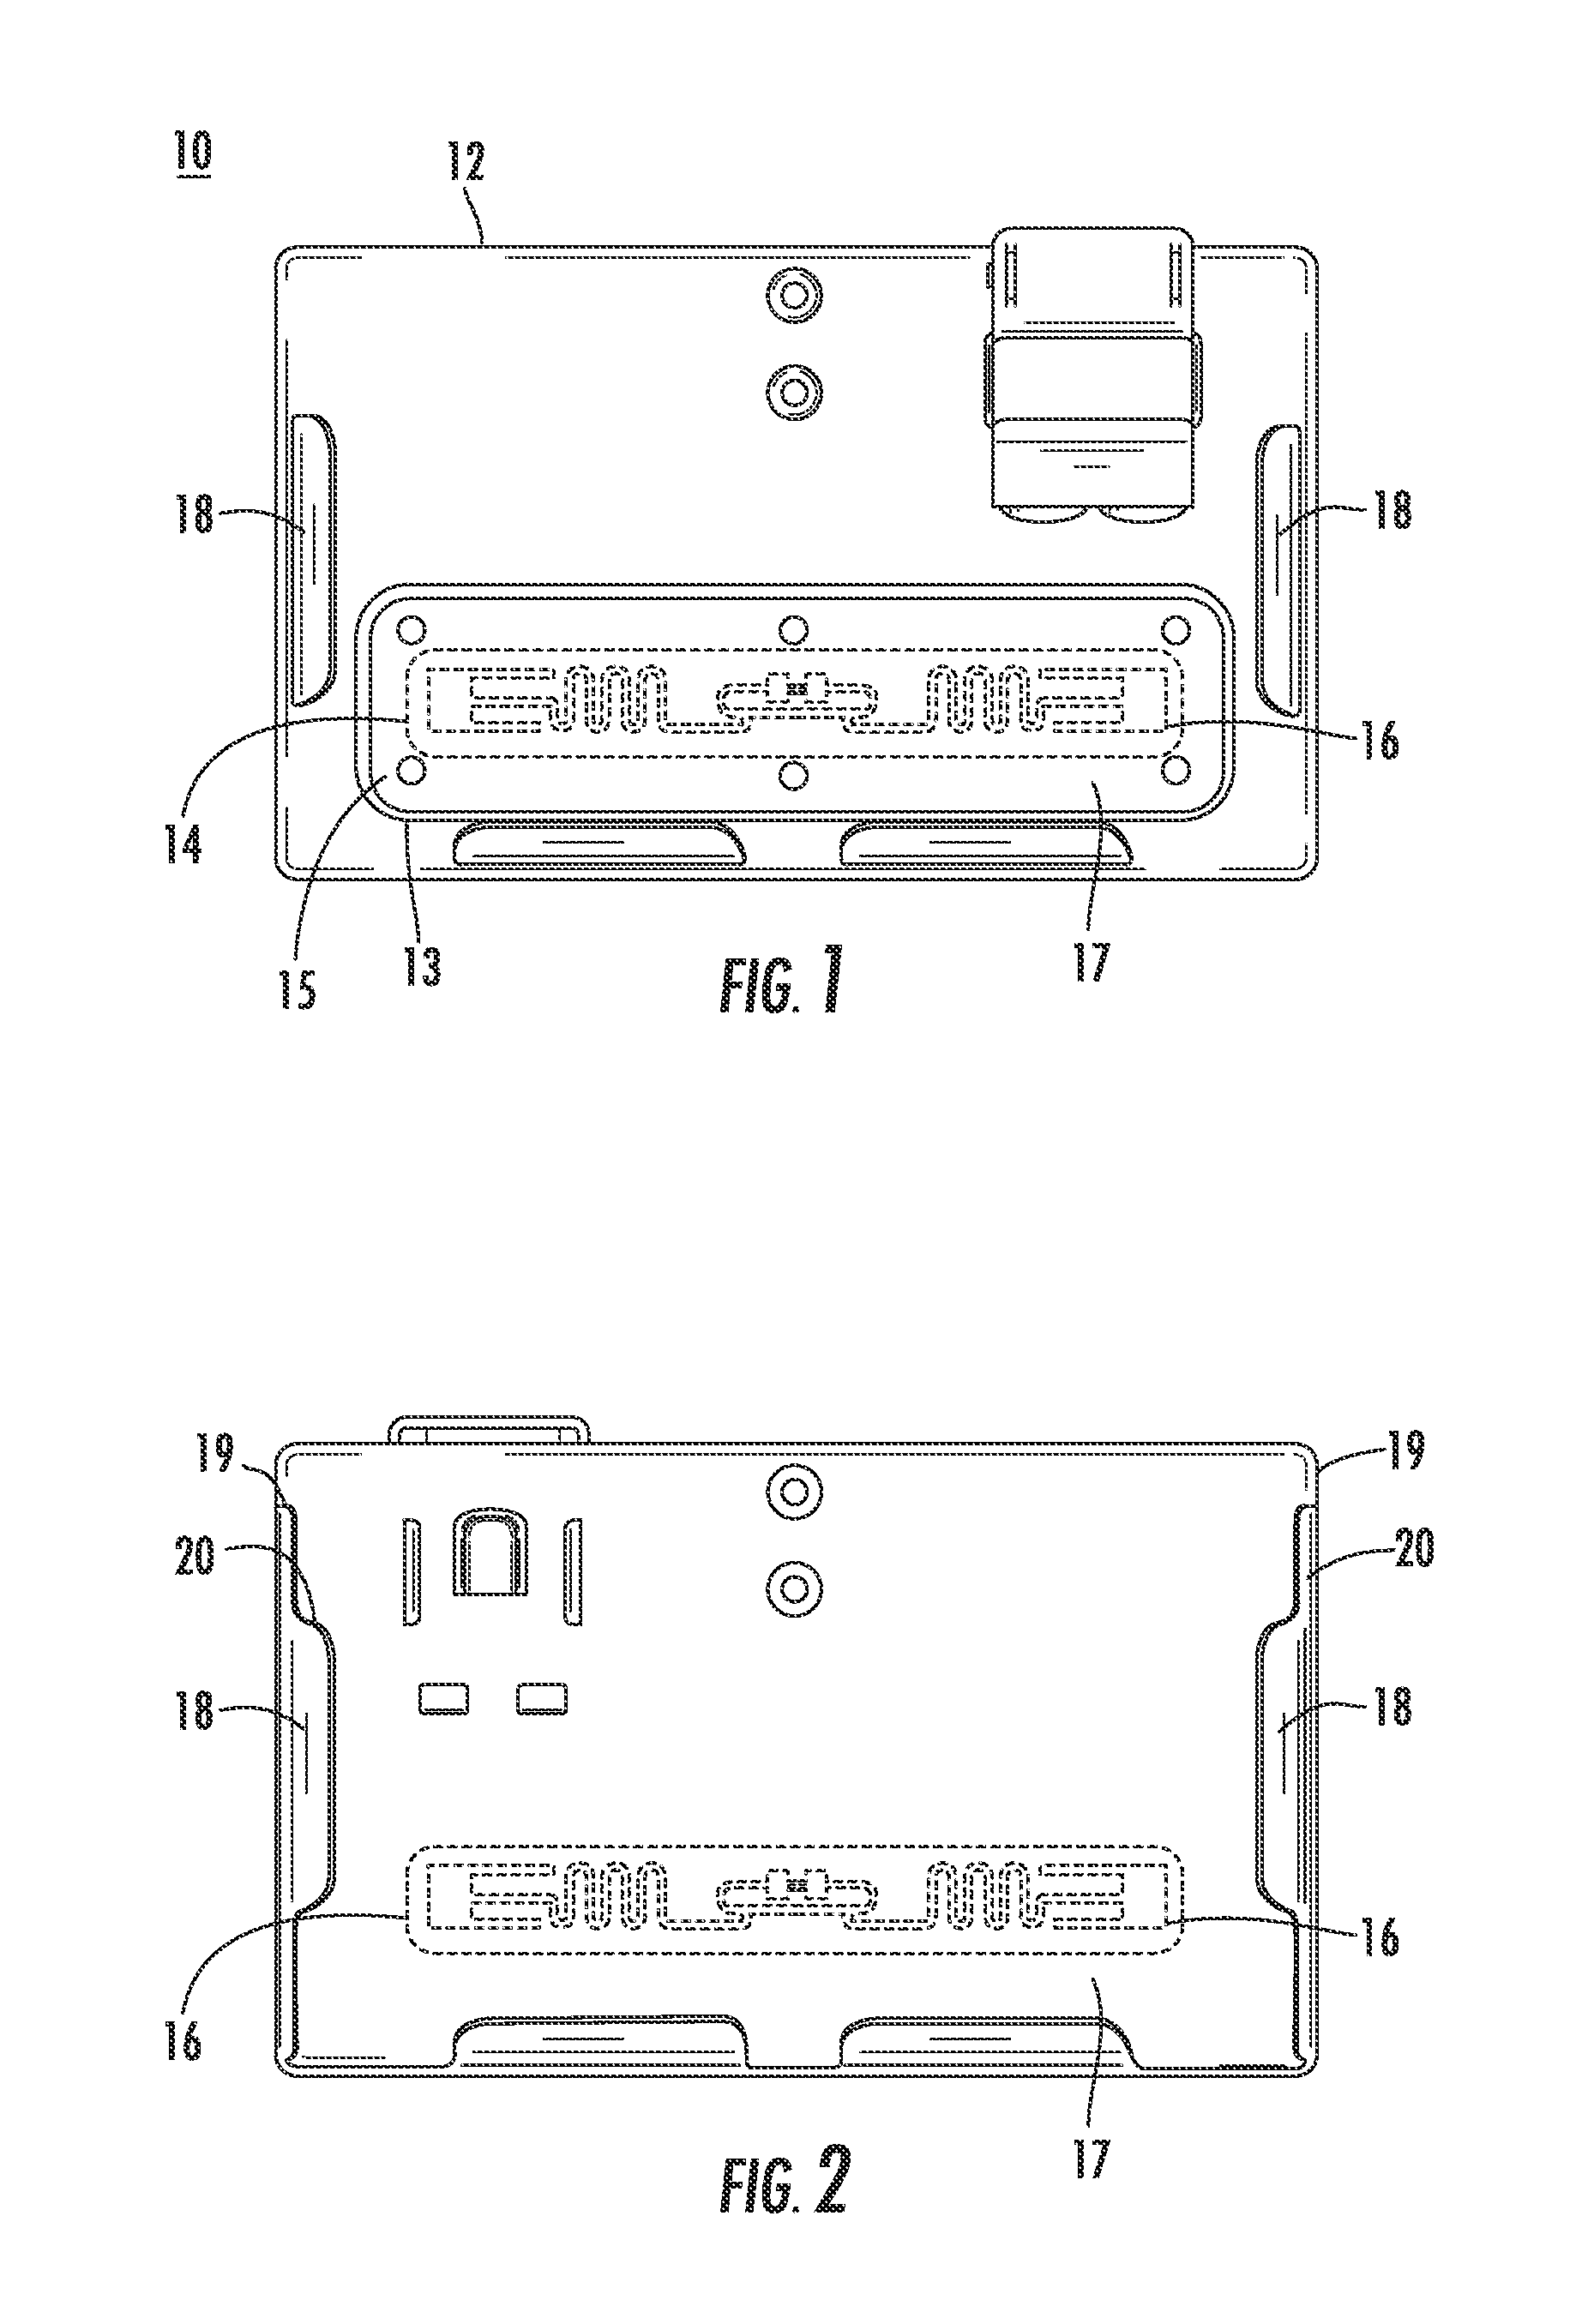 Integrated RFID tag in a card holder, cage, lid, and rack for use with inventorying and tracking of cage occupants and equipment